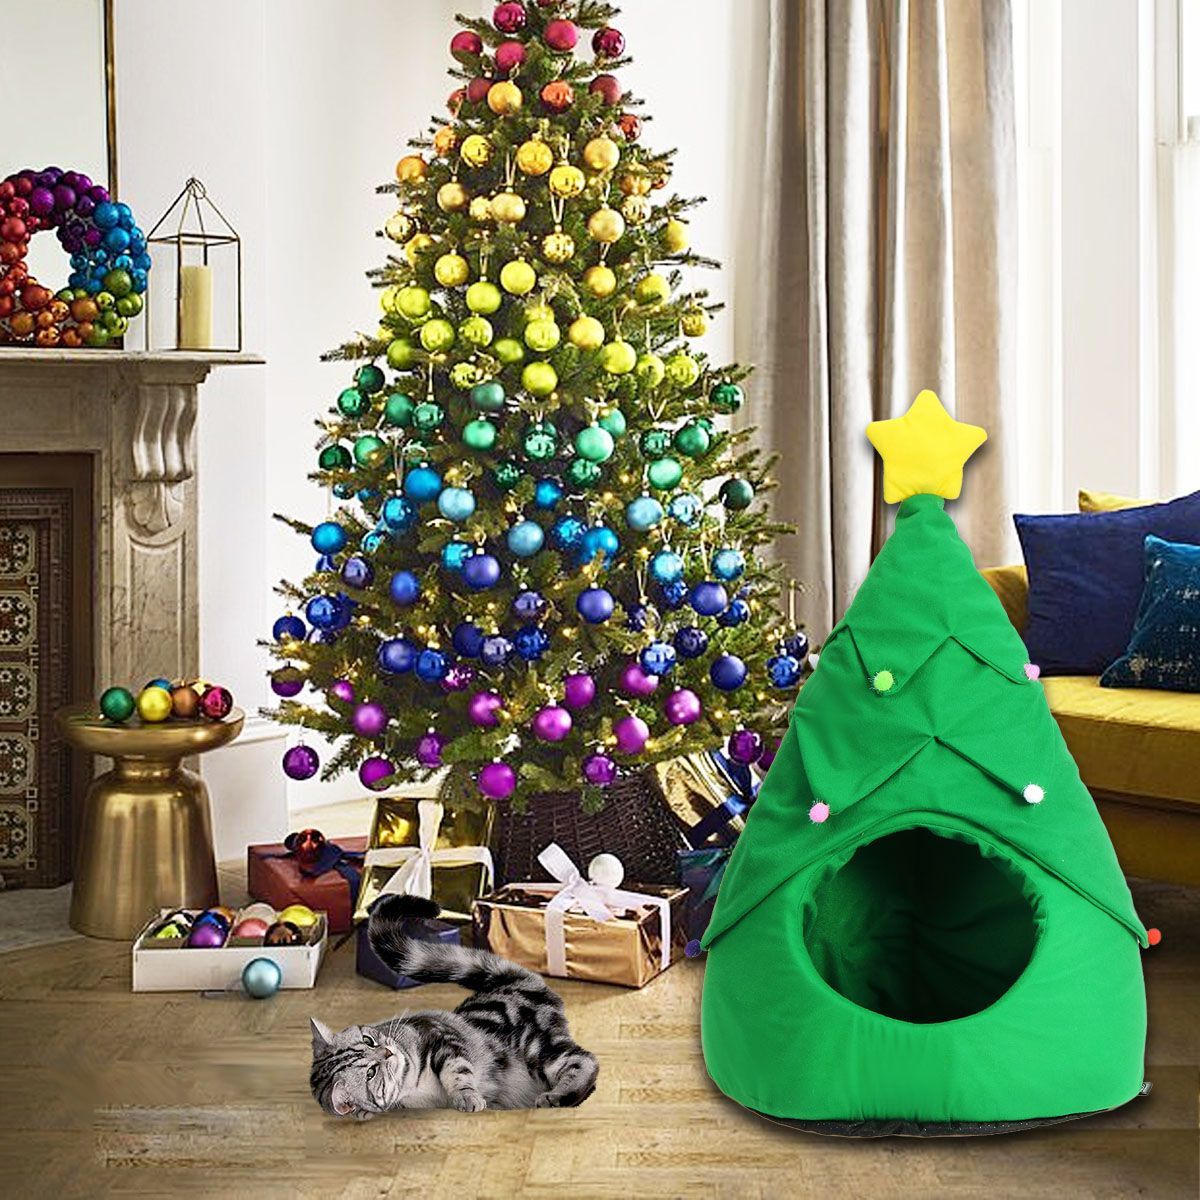 Christmas-Tree-Elk-Pet-House-Breathable-Semi-Closed-Soft-Cat-House-Green-Cat-Dog-Bed-1600650